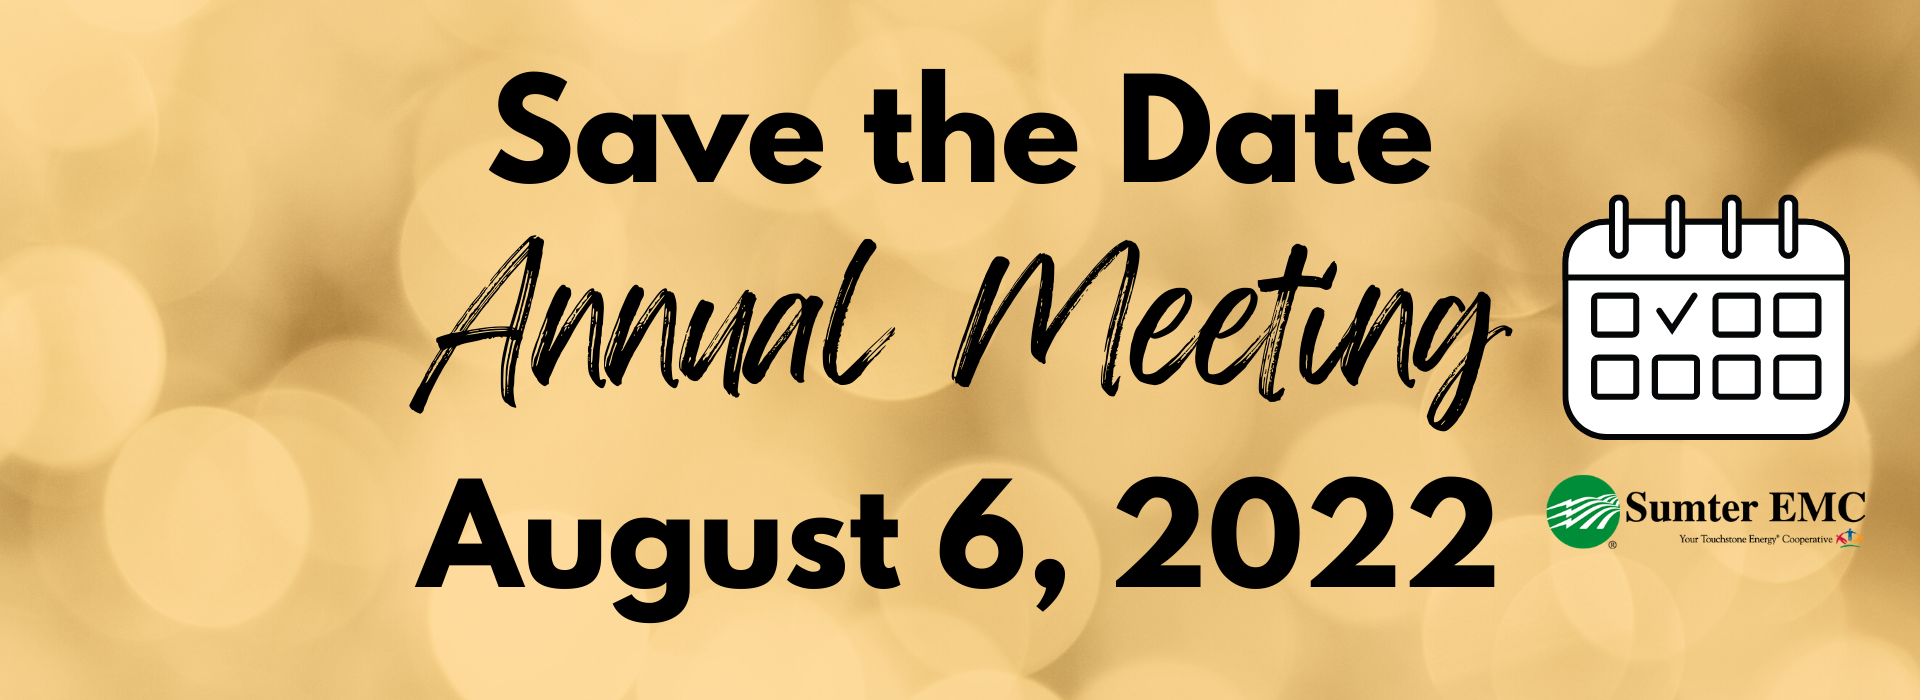 Save the Date: 2022 Annual Meeting 